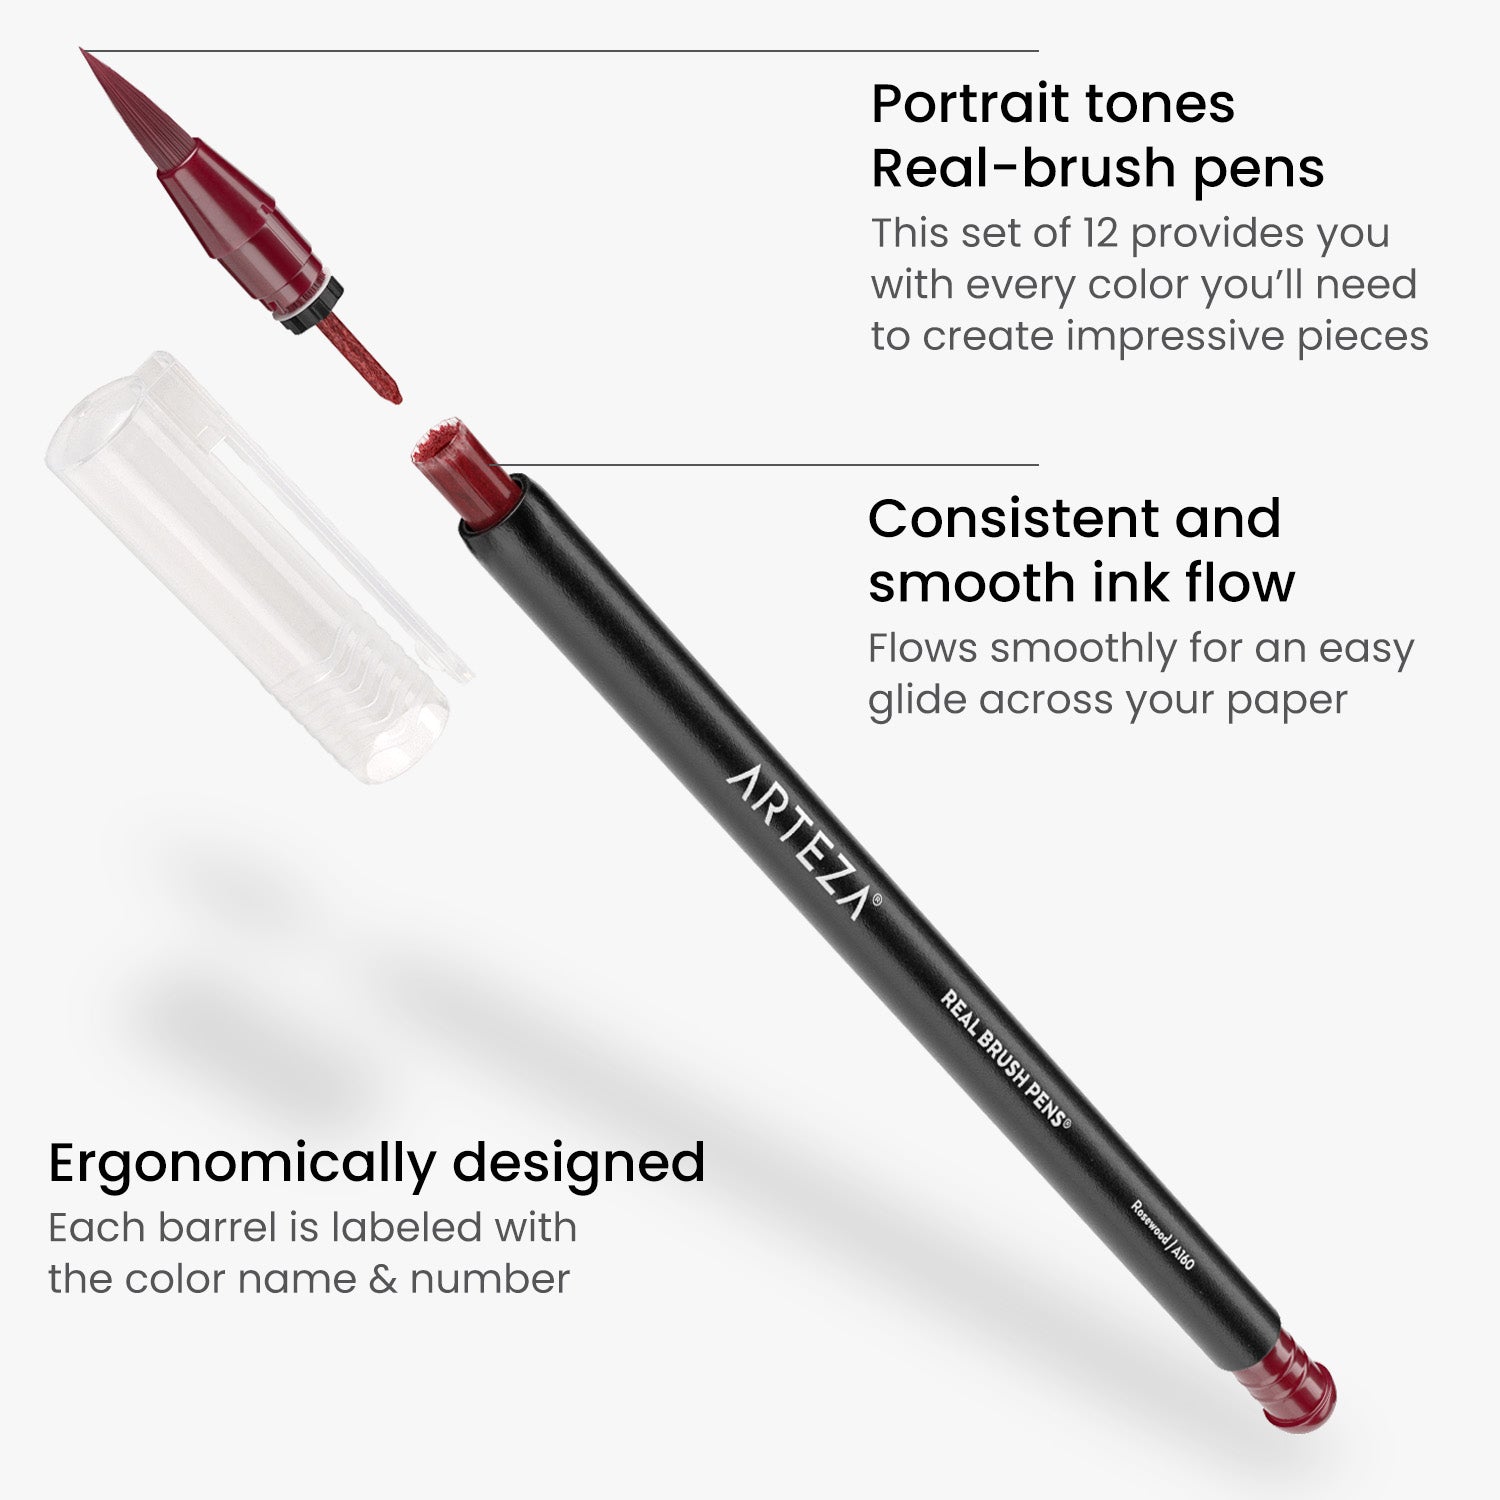 Arteza - Have you tried our best selling Real Brush Pens?